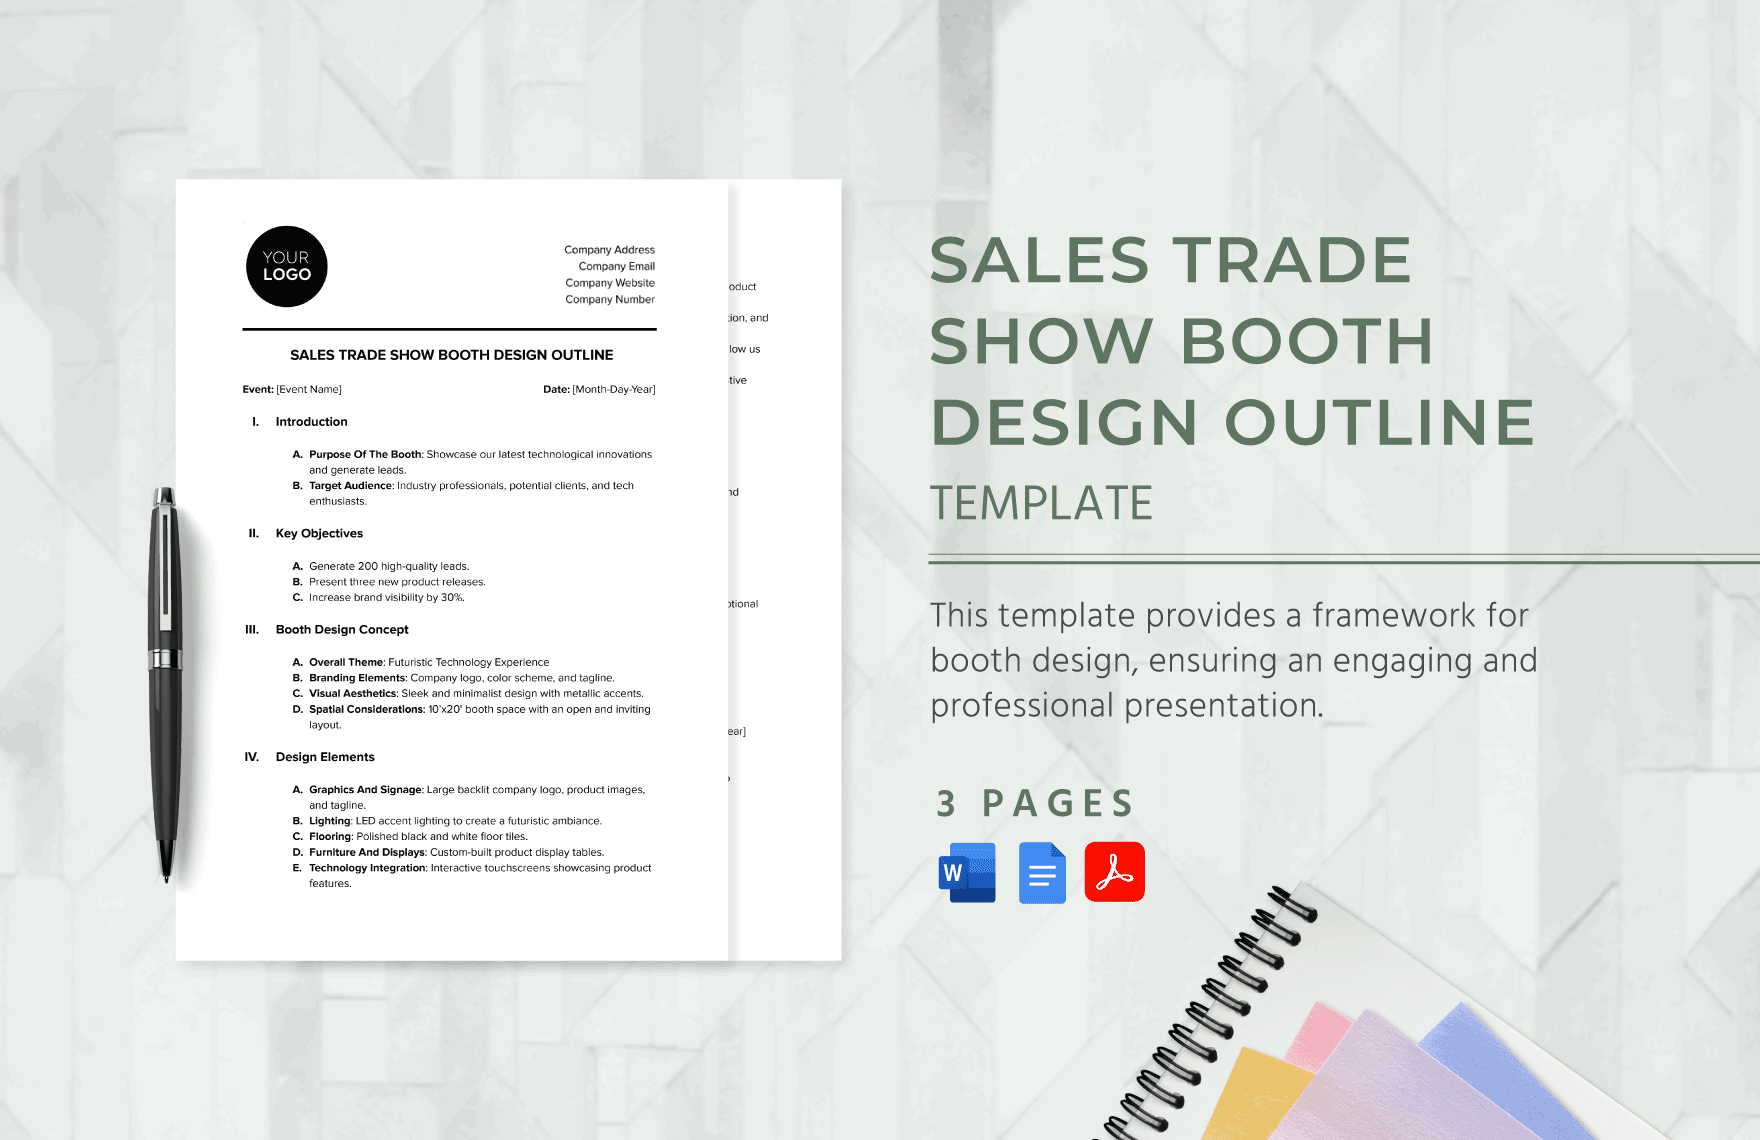 Sales Trade Show Booth Design Outline Template in Word, Google Docs, PDF